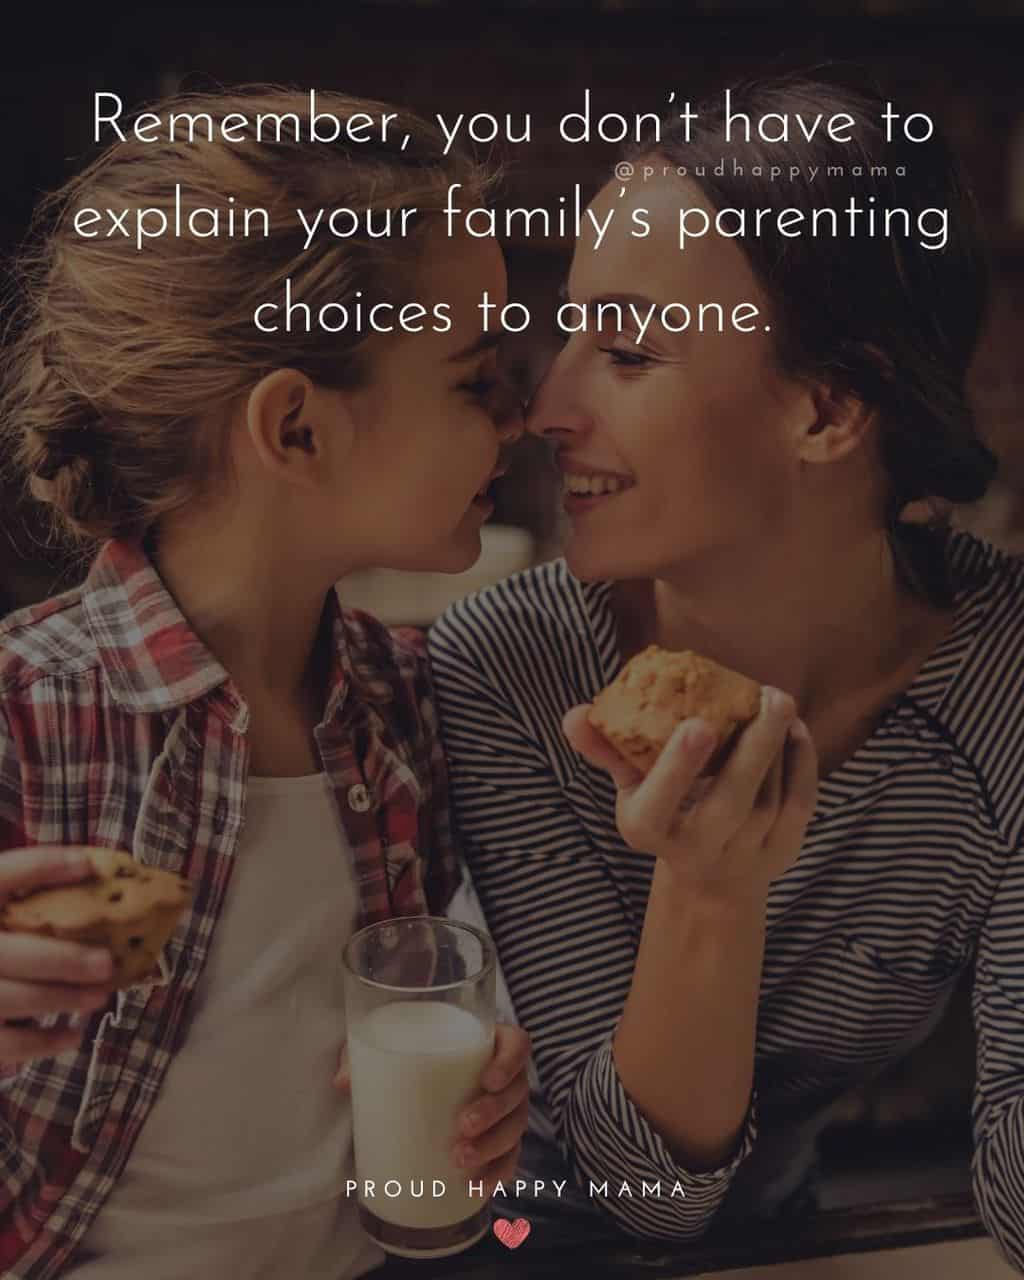 Parenting Quotes - Remember, you don’t have to explain your family’s parenting choices to anyone.’